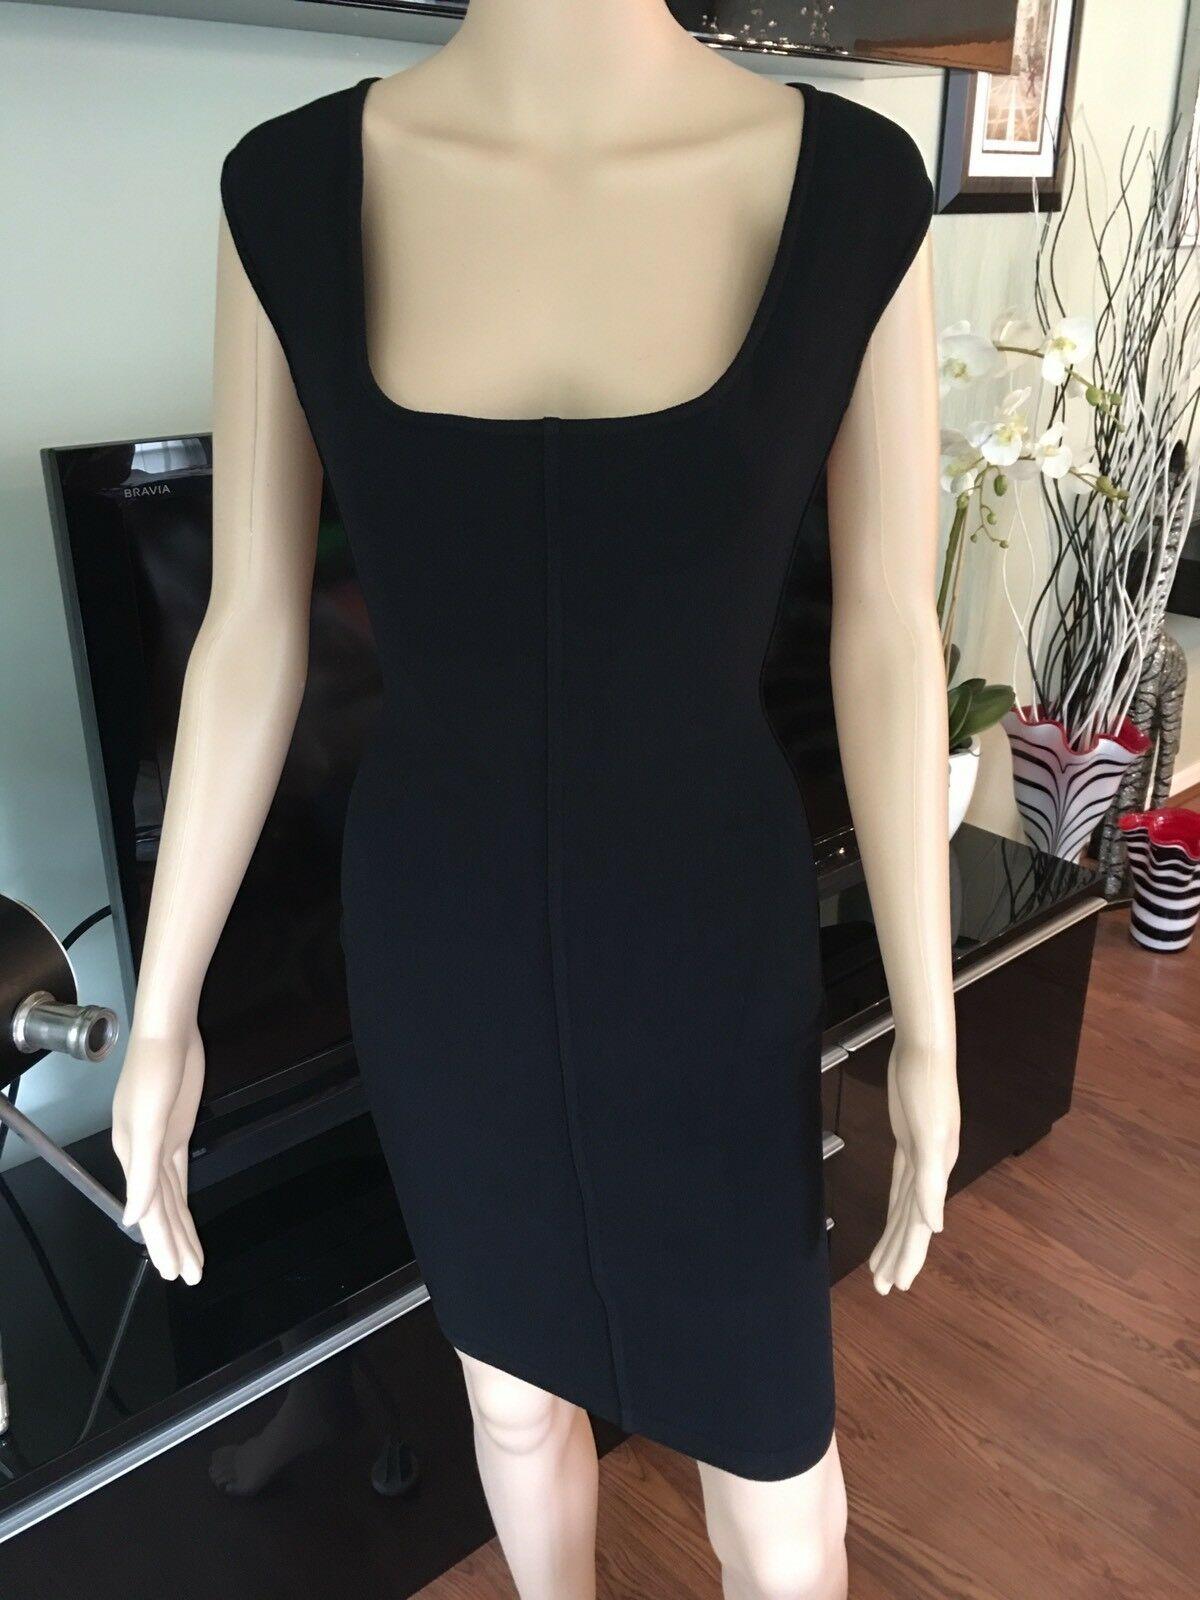 Azzedine Alaia Vintage Open Back Fitted Dress Size XS

Black Alaïa sleeveless mini dress with tonal stitching throughout and cutout at back.

All Eyes on Alaïa

For the last half-century, the world’s most fashionable and adventuresome women have